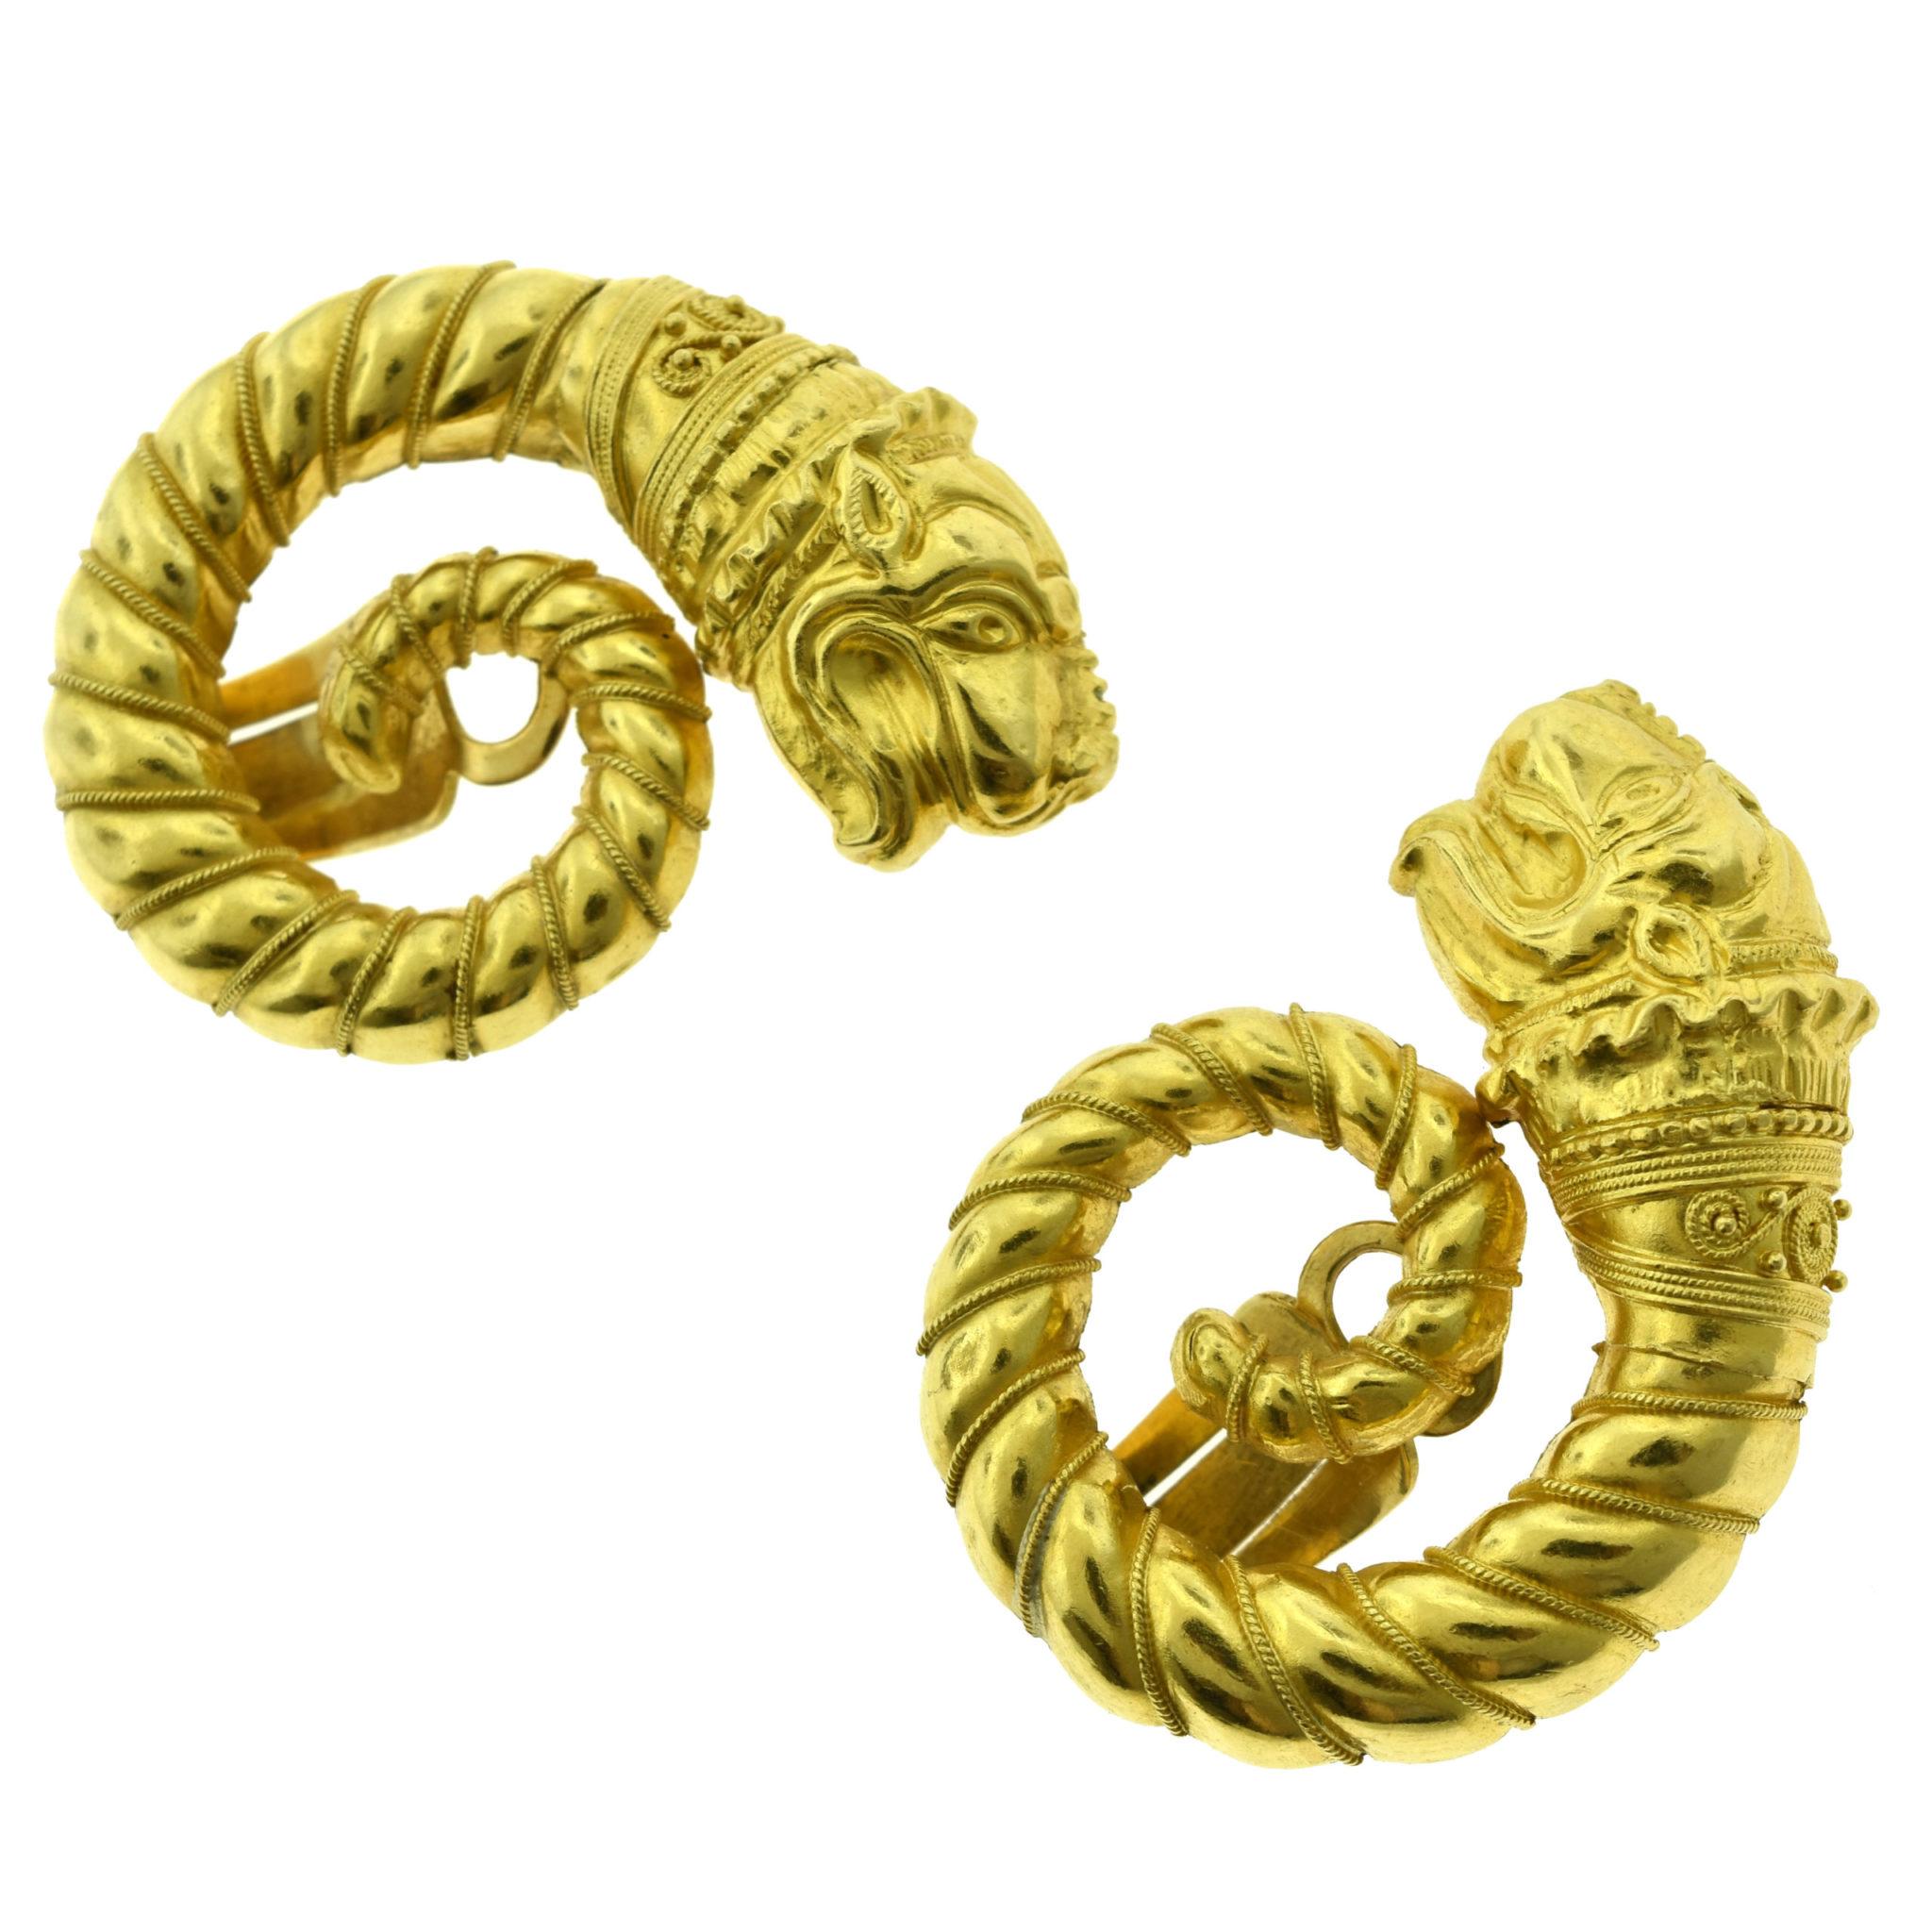 Designer: Ilias Lalaounis

Style: Clip On Earrings

Metal: Yellow Gold

Metal Purity: 18k

Total Item Weight (grams):  29.0

Earring Dimensions: 1.25 inches x 1.75 inches

Hallmark: A.8 750

Signature: GREECE

Includes: 24 Month Brilliance Jewels